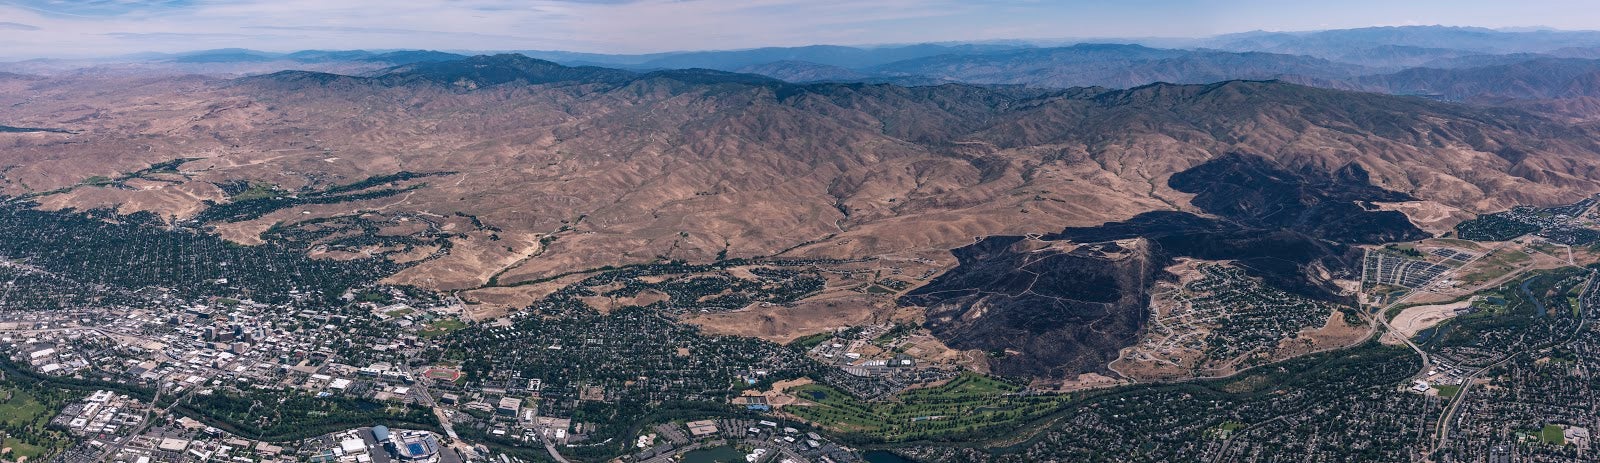 Aerial view of Boise Foothills with large black patterns from fire